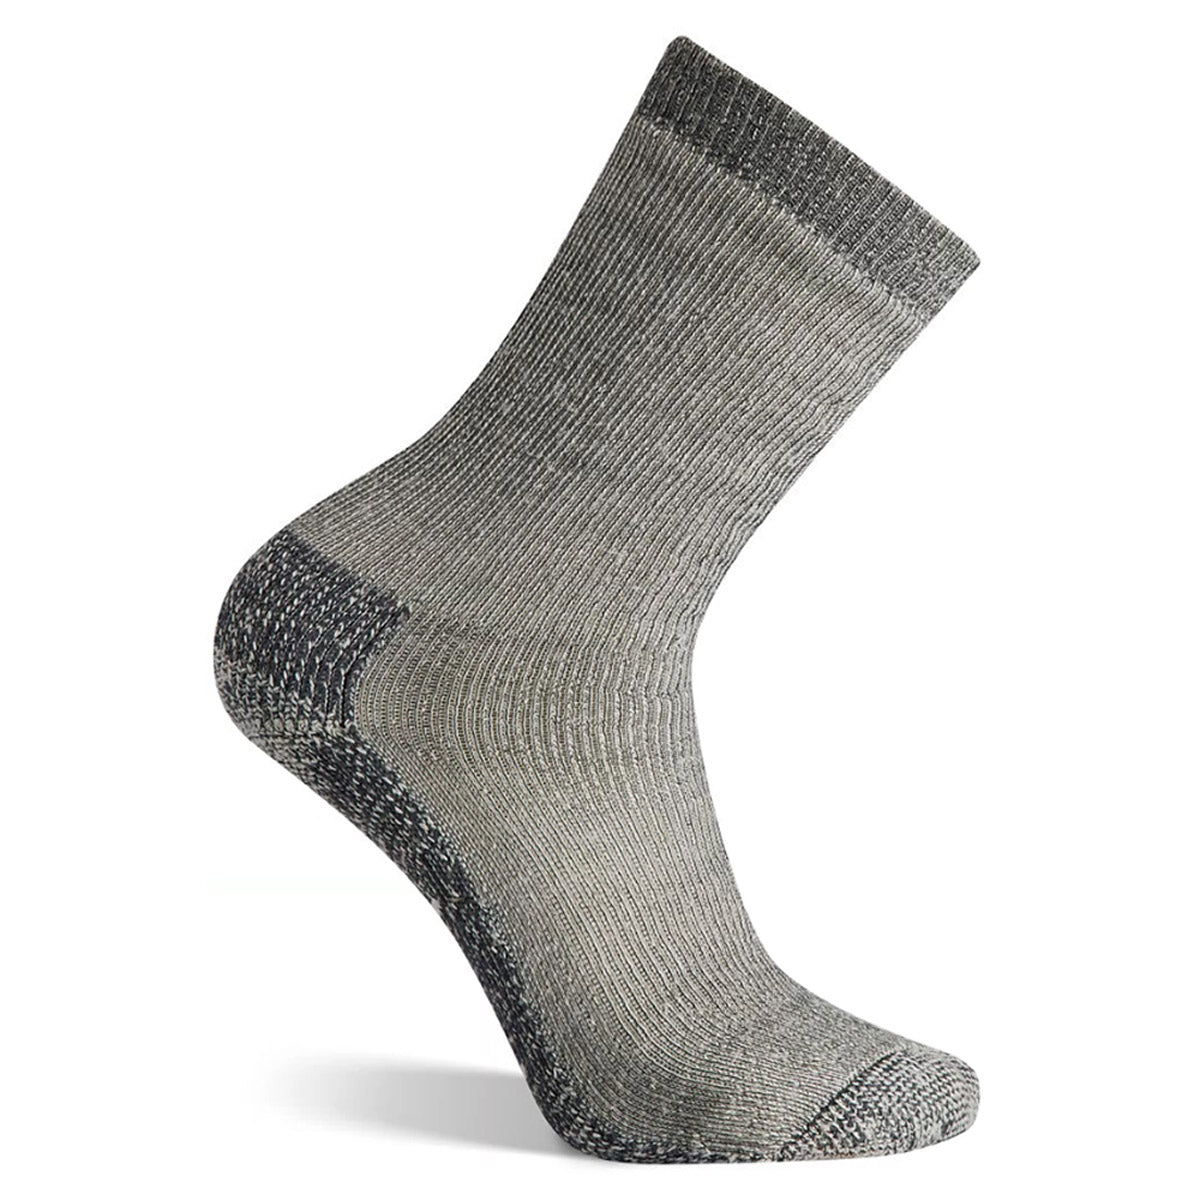 A single gray Smartwool Classic Hike Extra Cushion Medium Grey crew sock displayed against a white background.